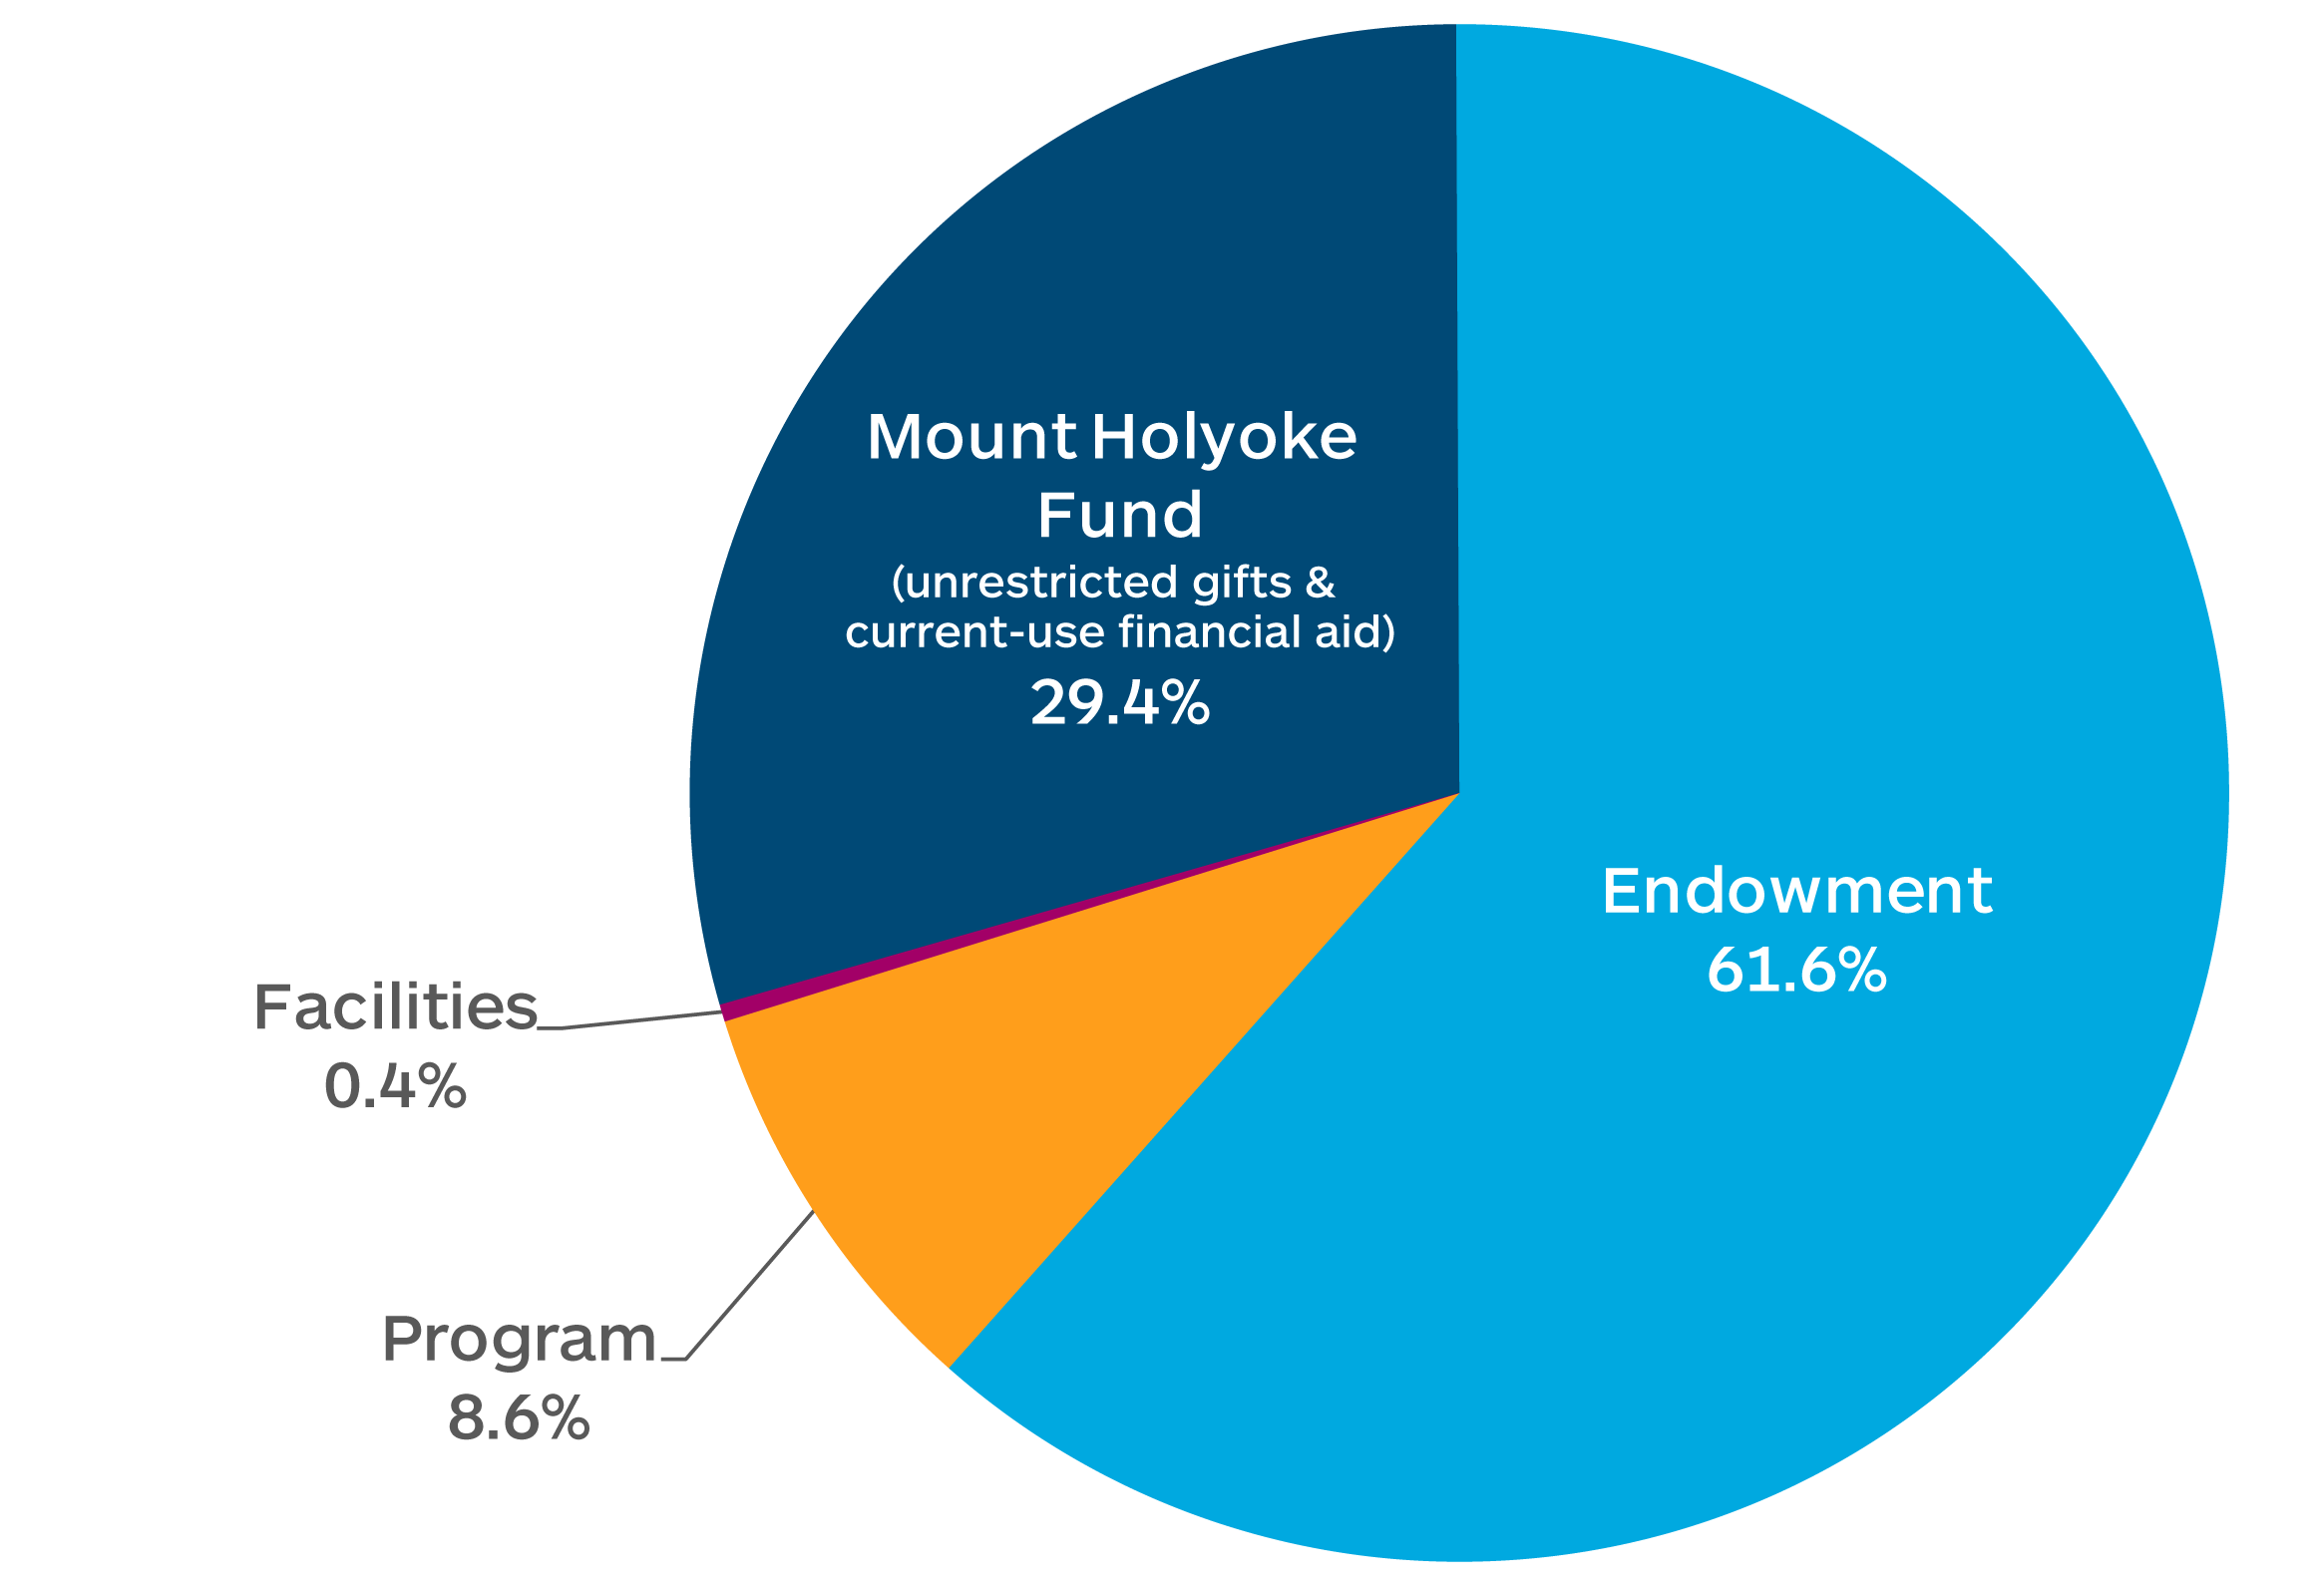 Gifts by Purpose: Endowment 61.6%, Mount Holyoke Fund 29.4%, Programs 8.6%, Facilities 0.4%